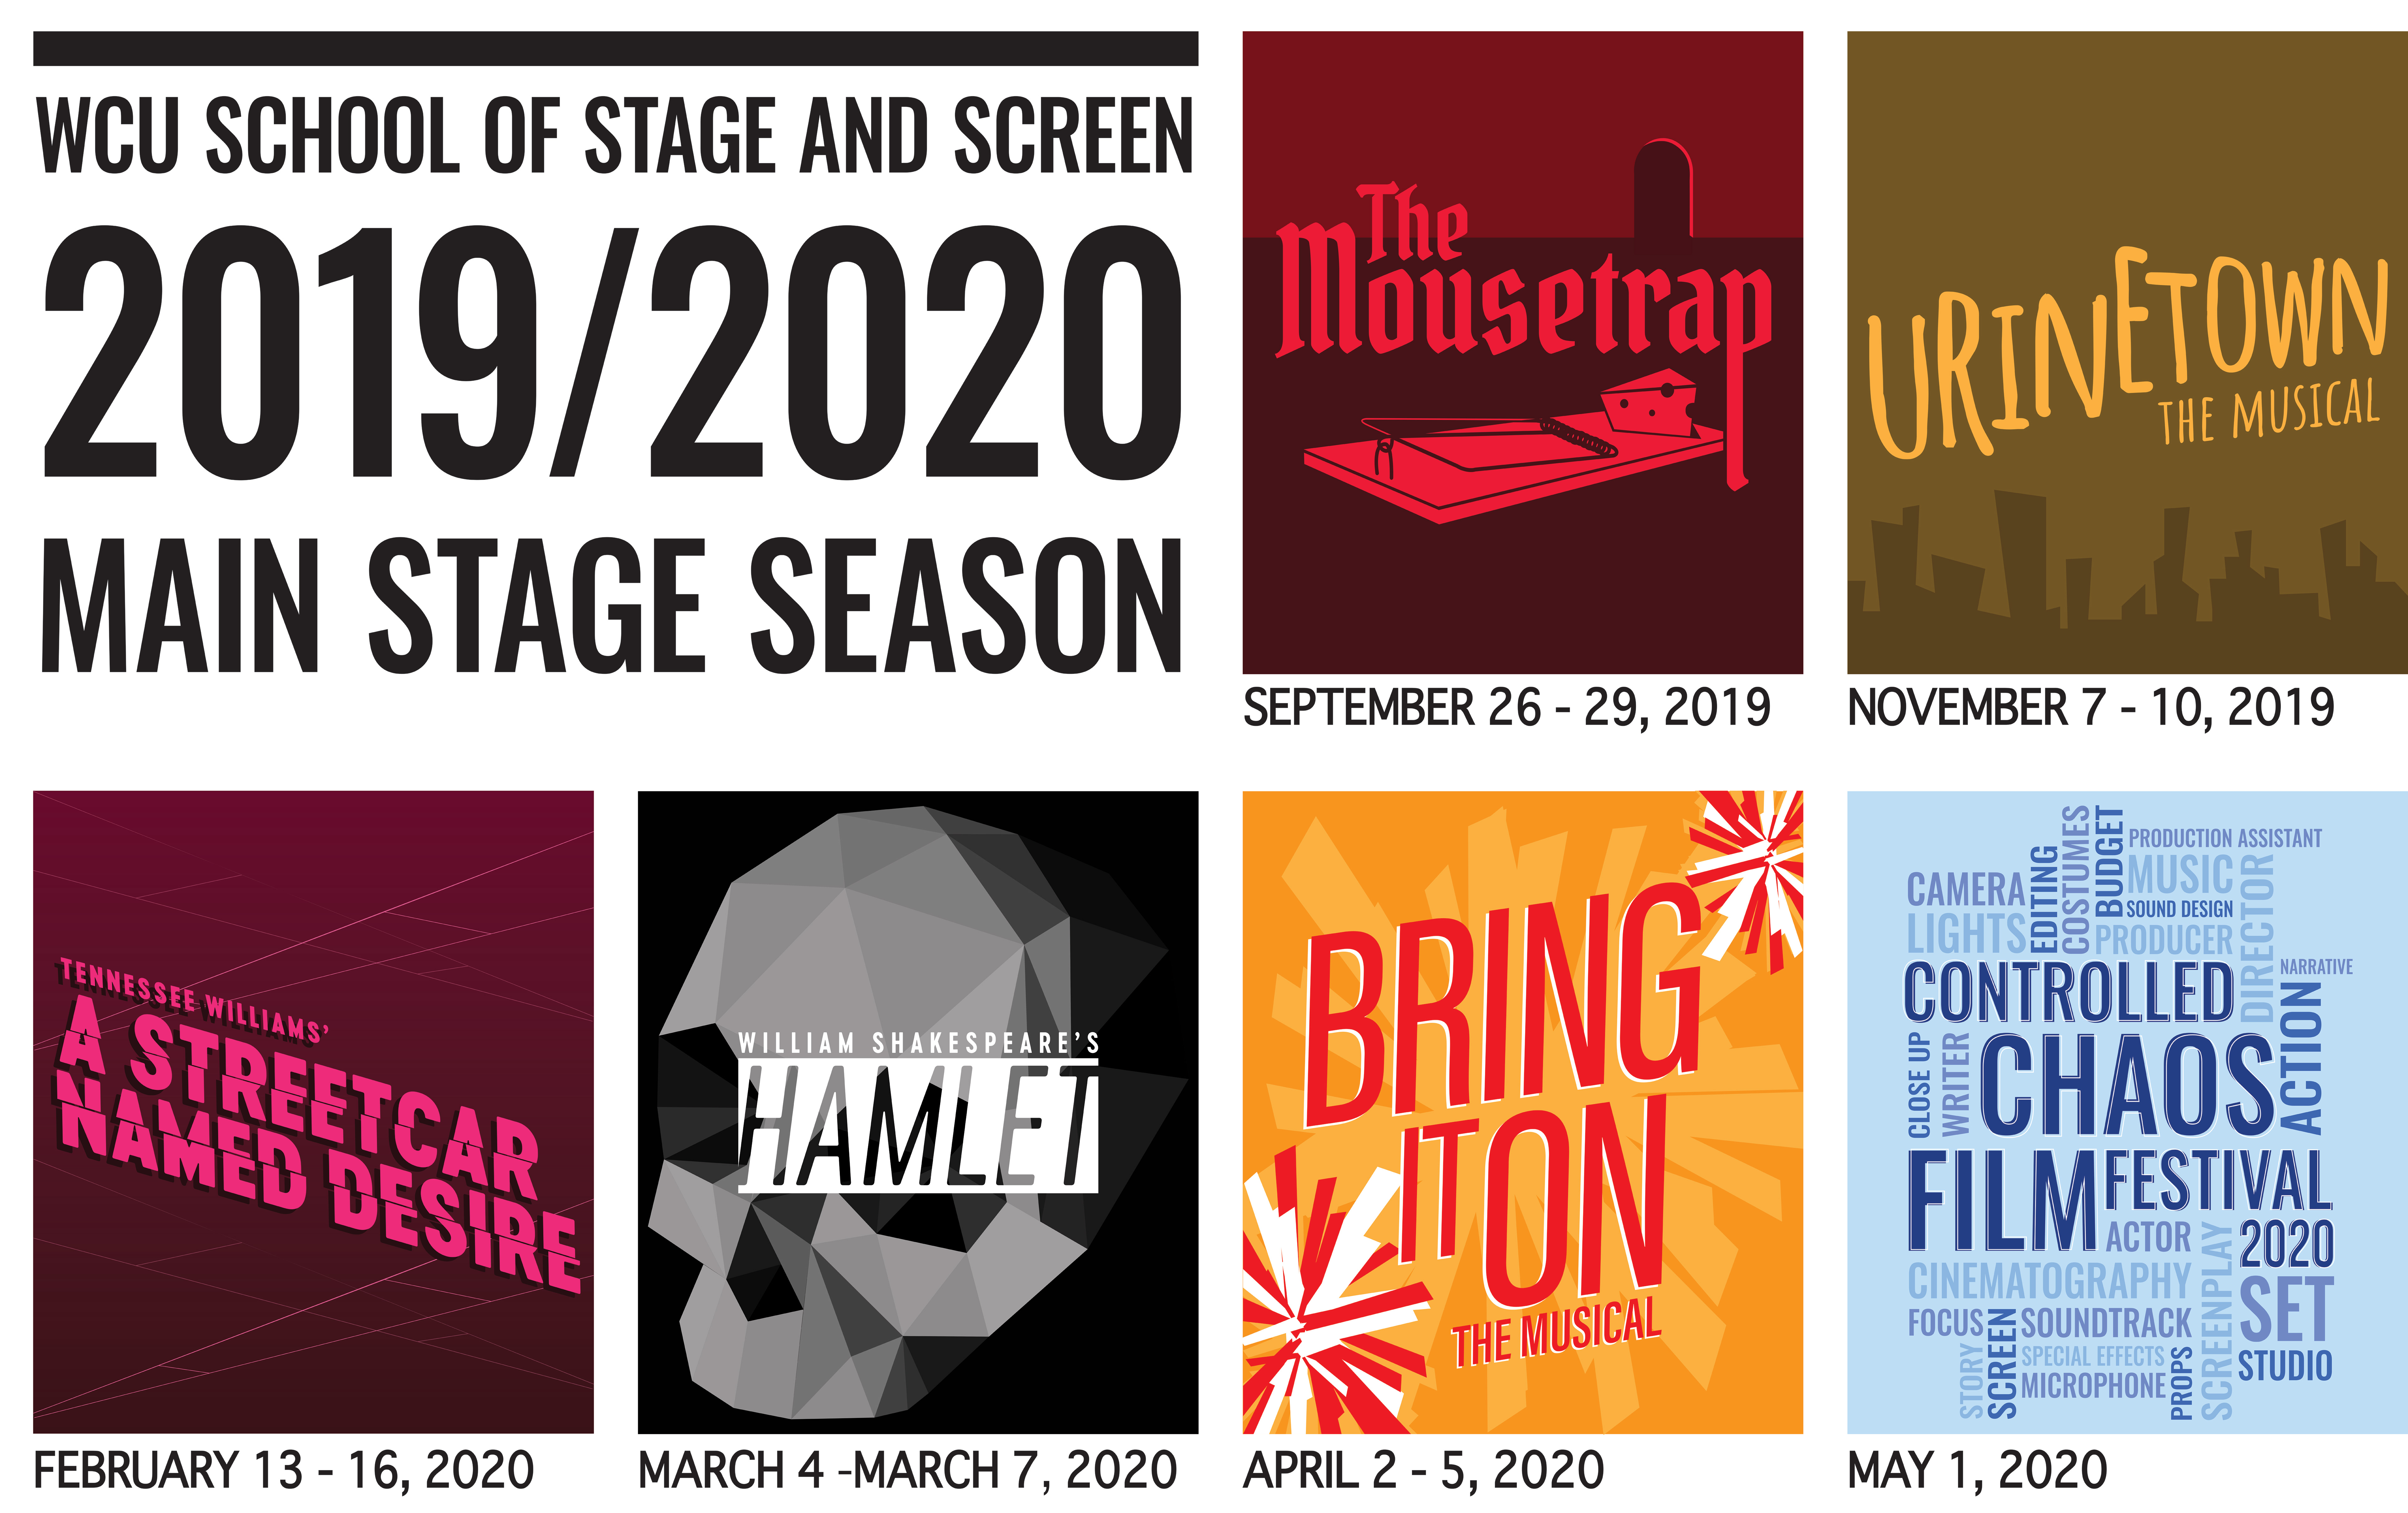 Stage and Screen's 2019/2020 Main Stage Productions with images from MouseTrap, UrineTown, A Streetcar Named Desire, Hamlet, Bring It On and Controlled Chaos Film Festival